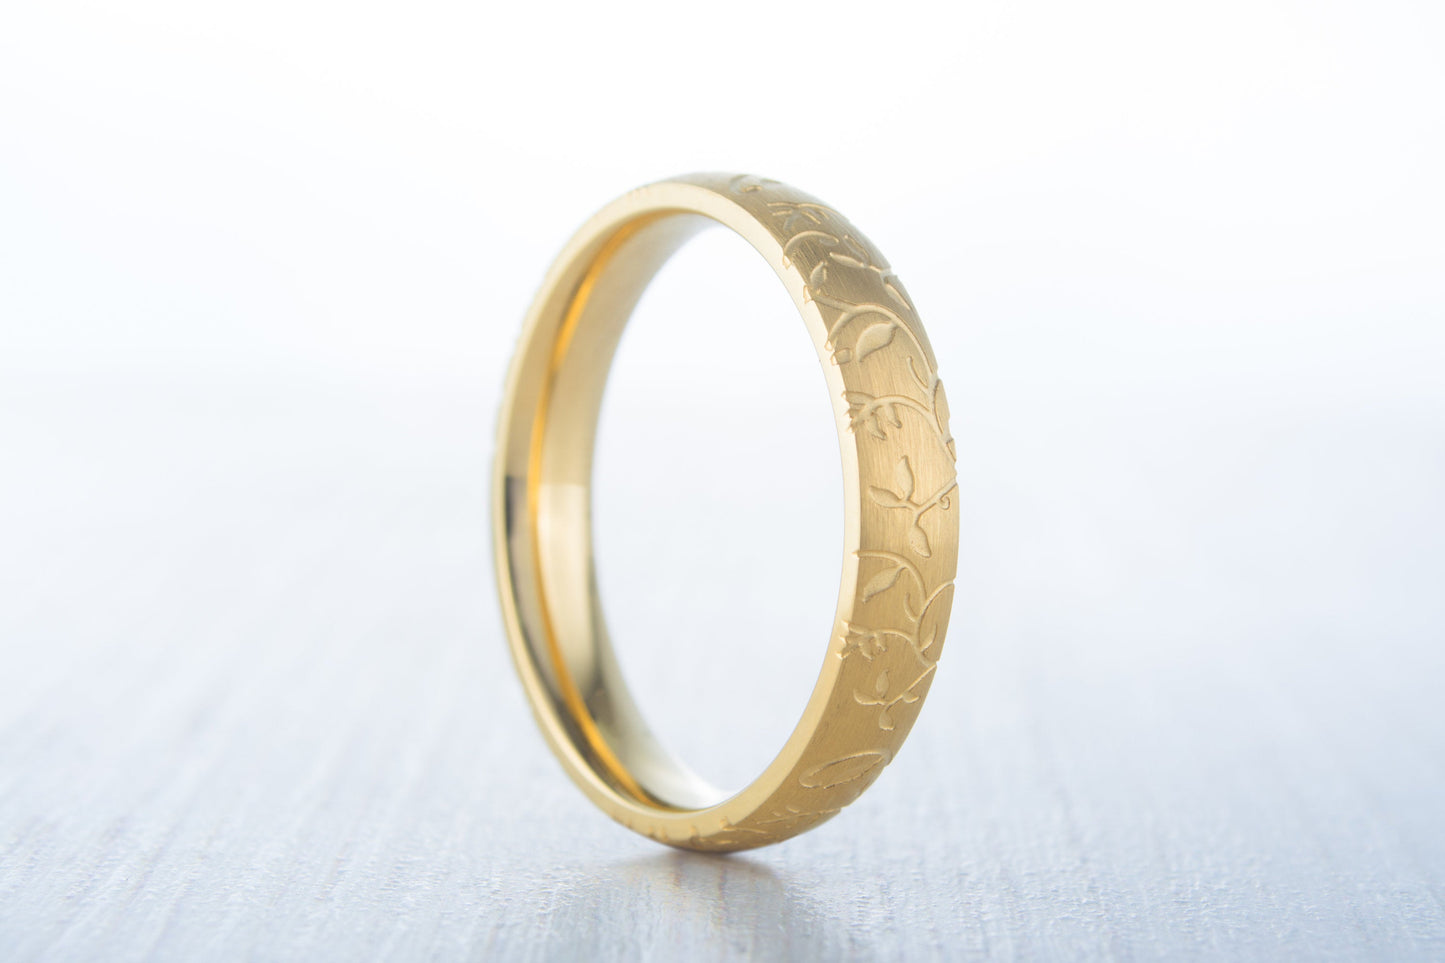 4mm wide 18K Yellow Gold and Brushed Titanium with engraved detail Wedding ring band for men and women